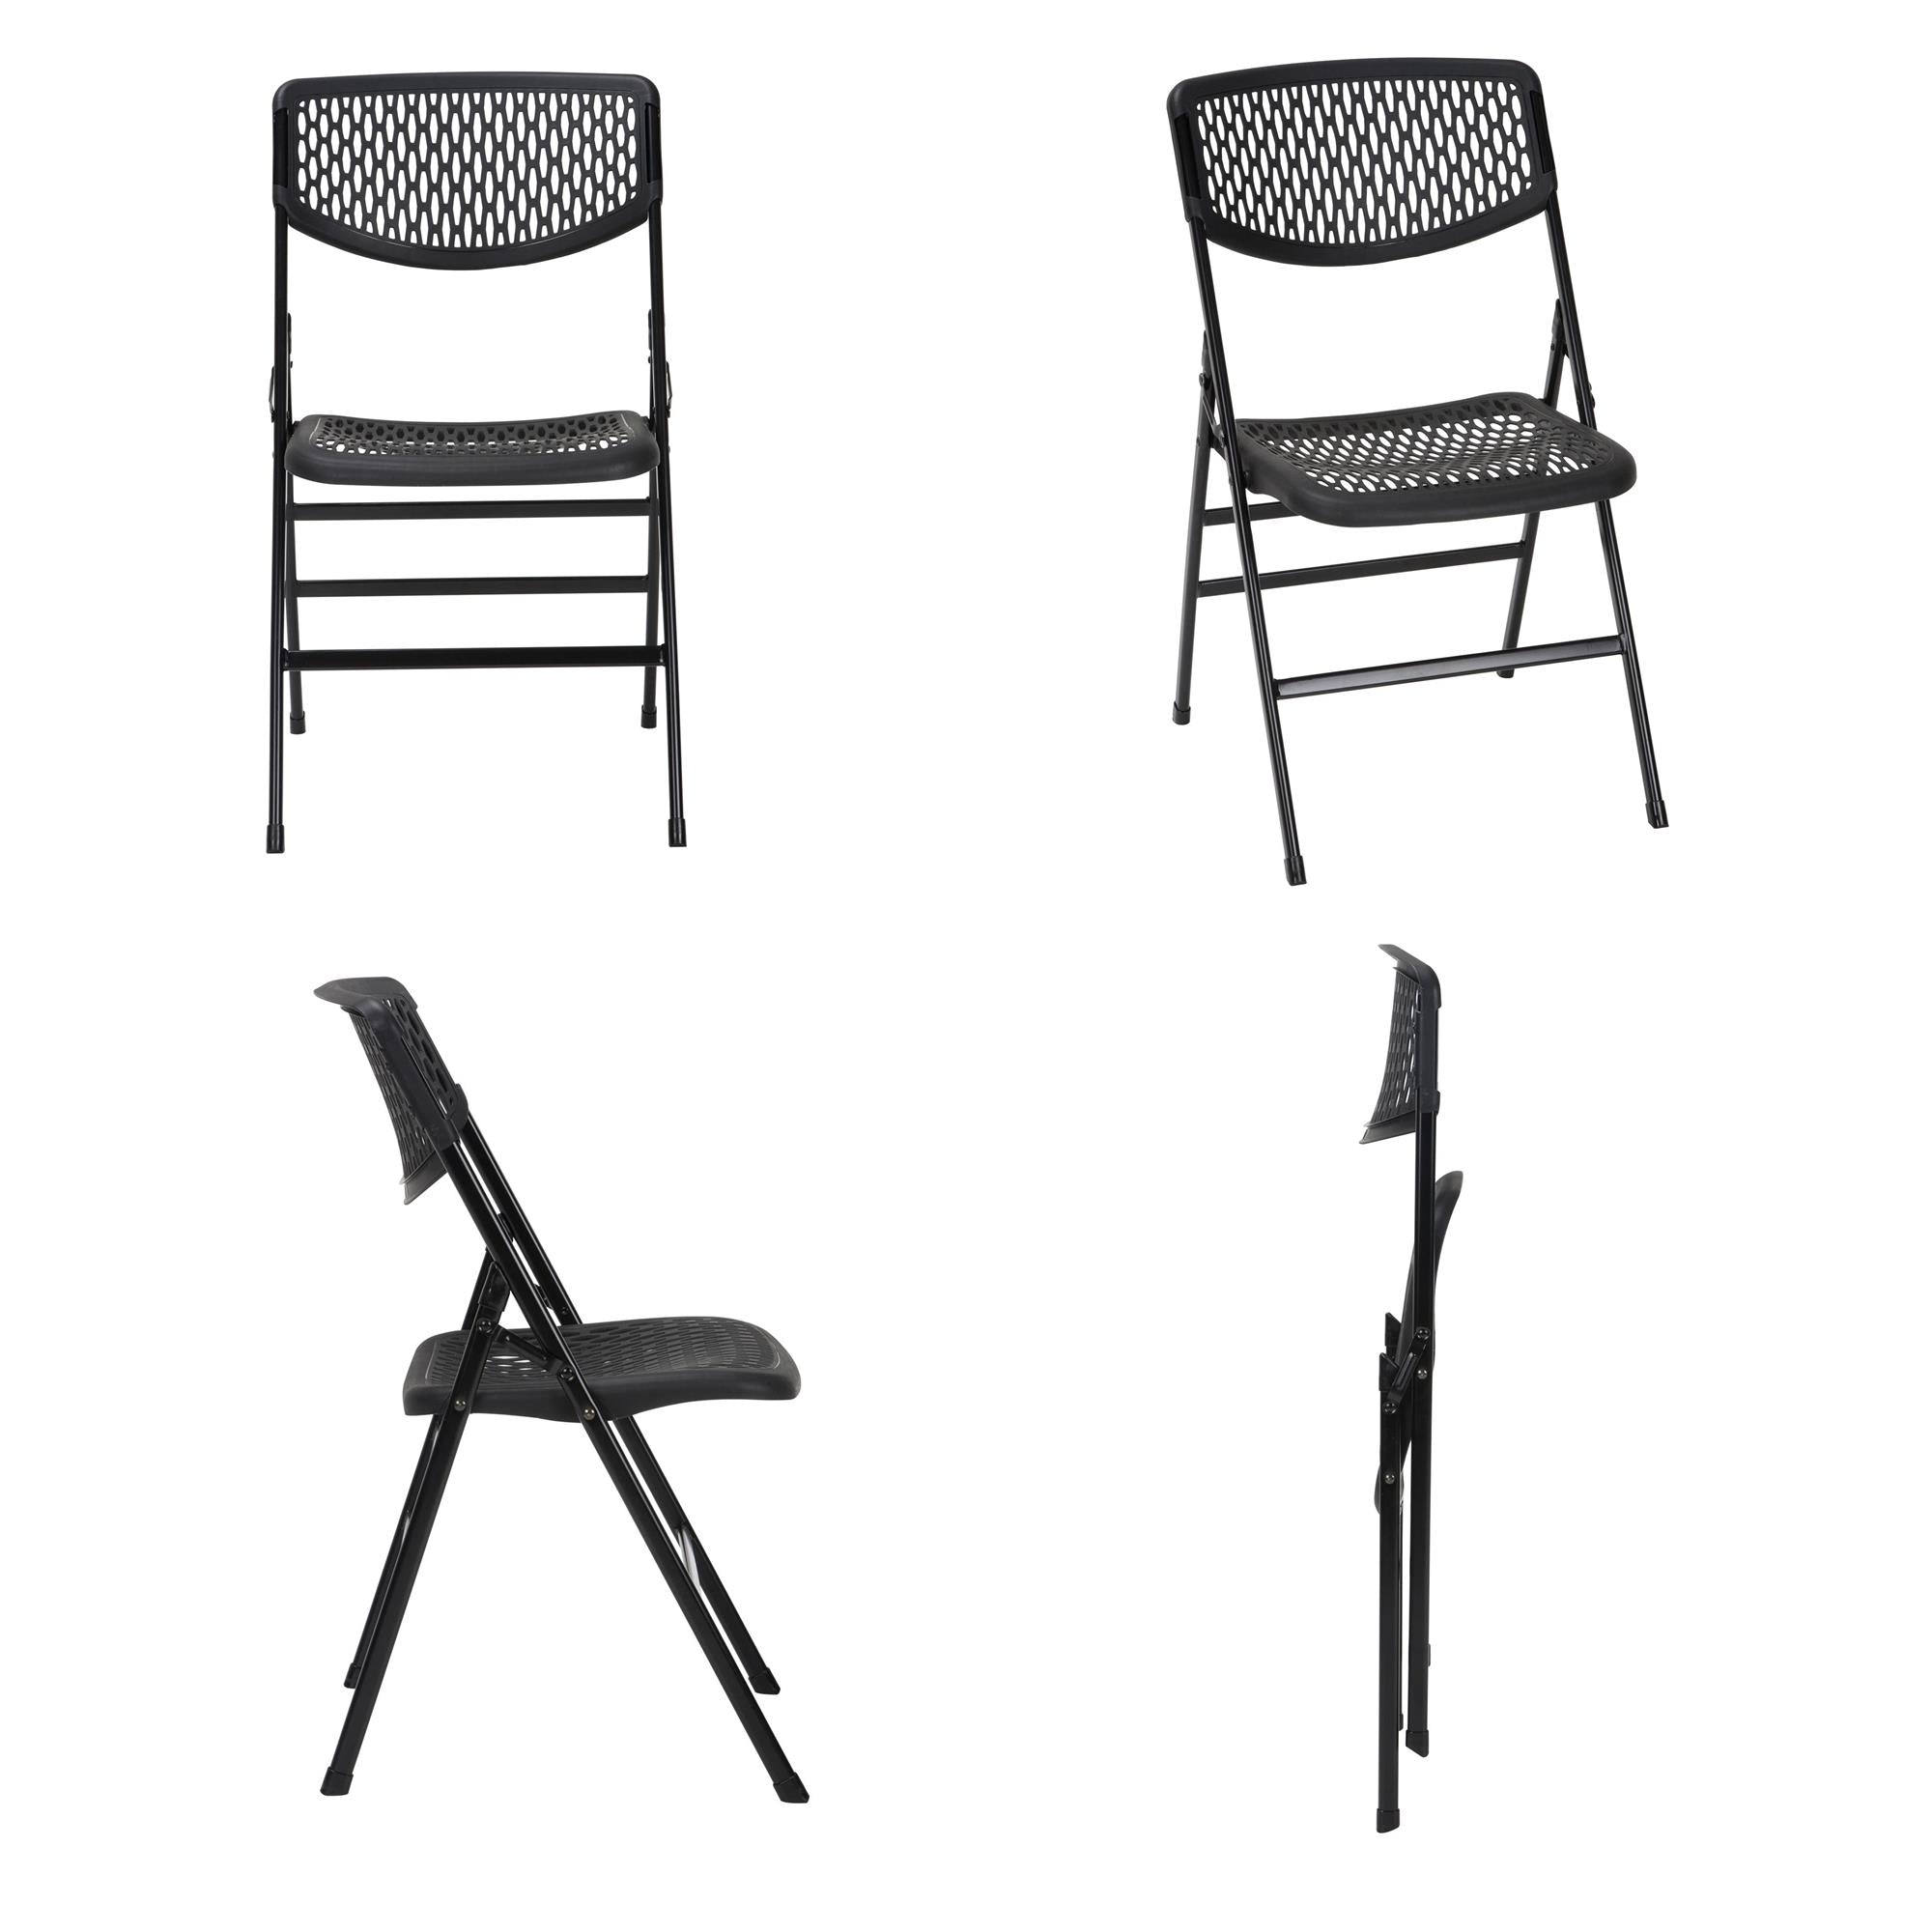 Ultra Comfort Commercial XL Plastic Folding Chair - Black - 4-Pack